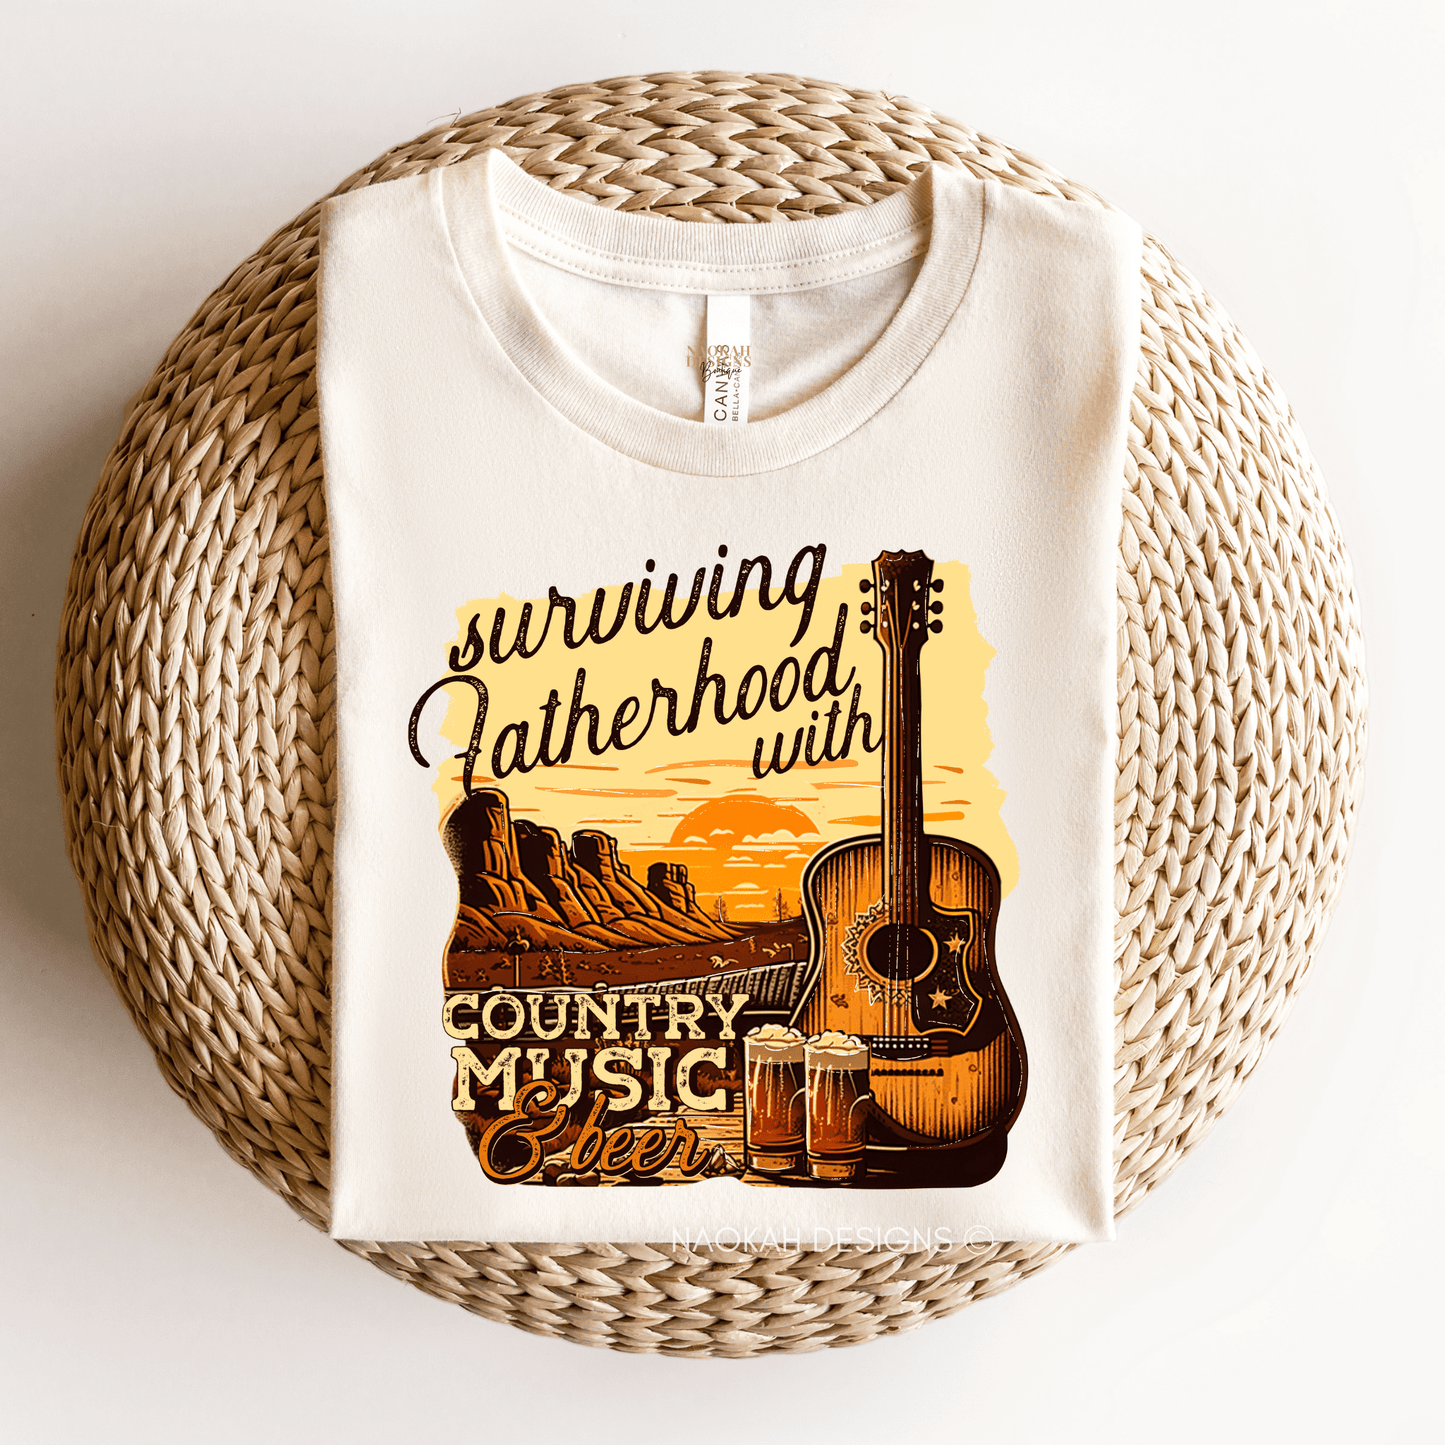 surviving fatherhood with country music and beer shirt, best dad ever shirt, fathers day gift shirt, fathers day gift, new dad shirt, father's day shirt, best dad t-shirt, best dad gift, dad shirt, country fan dad shirt, fathers day country shirt, dad beer shirt